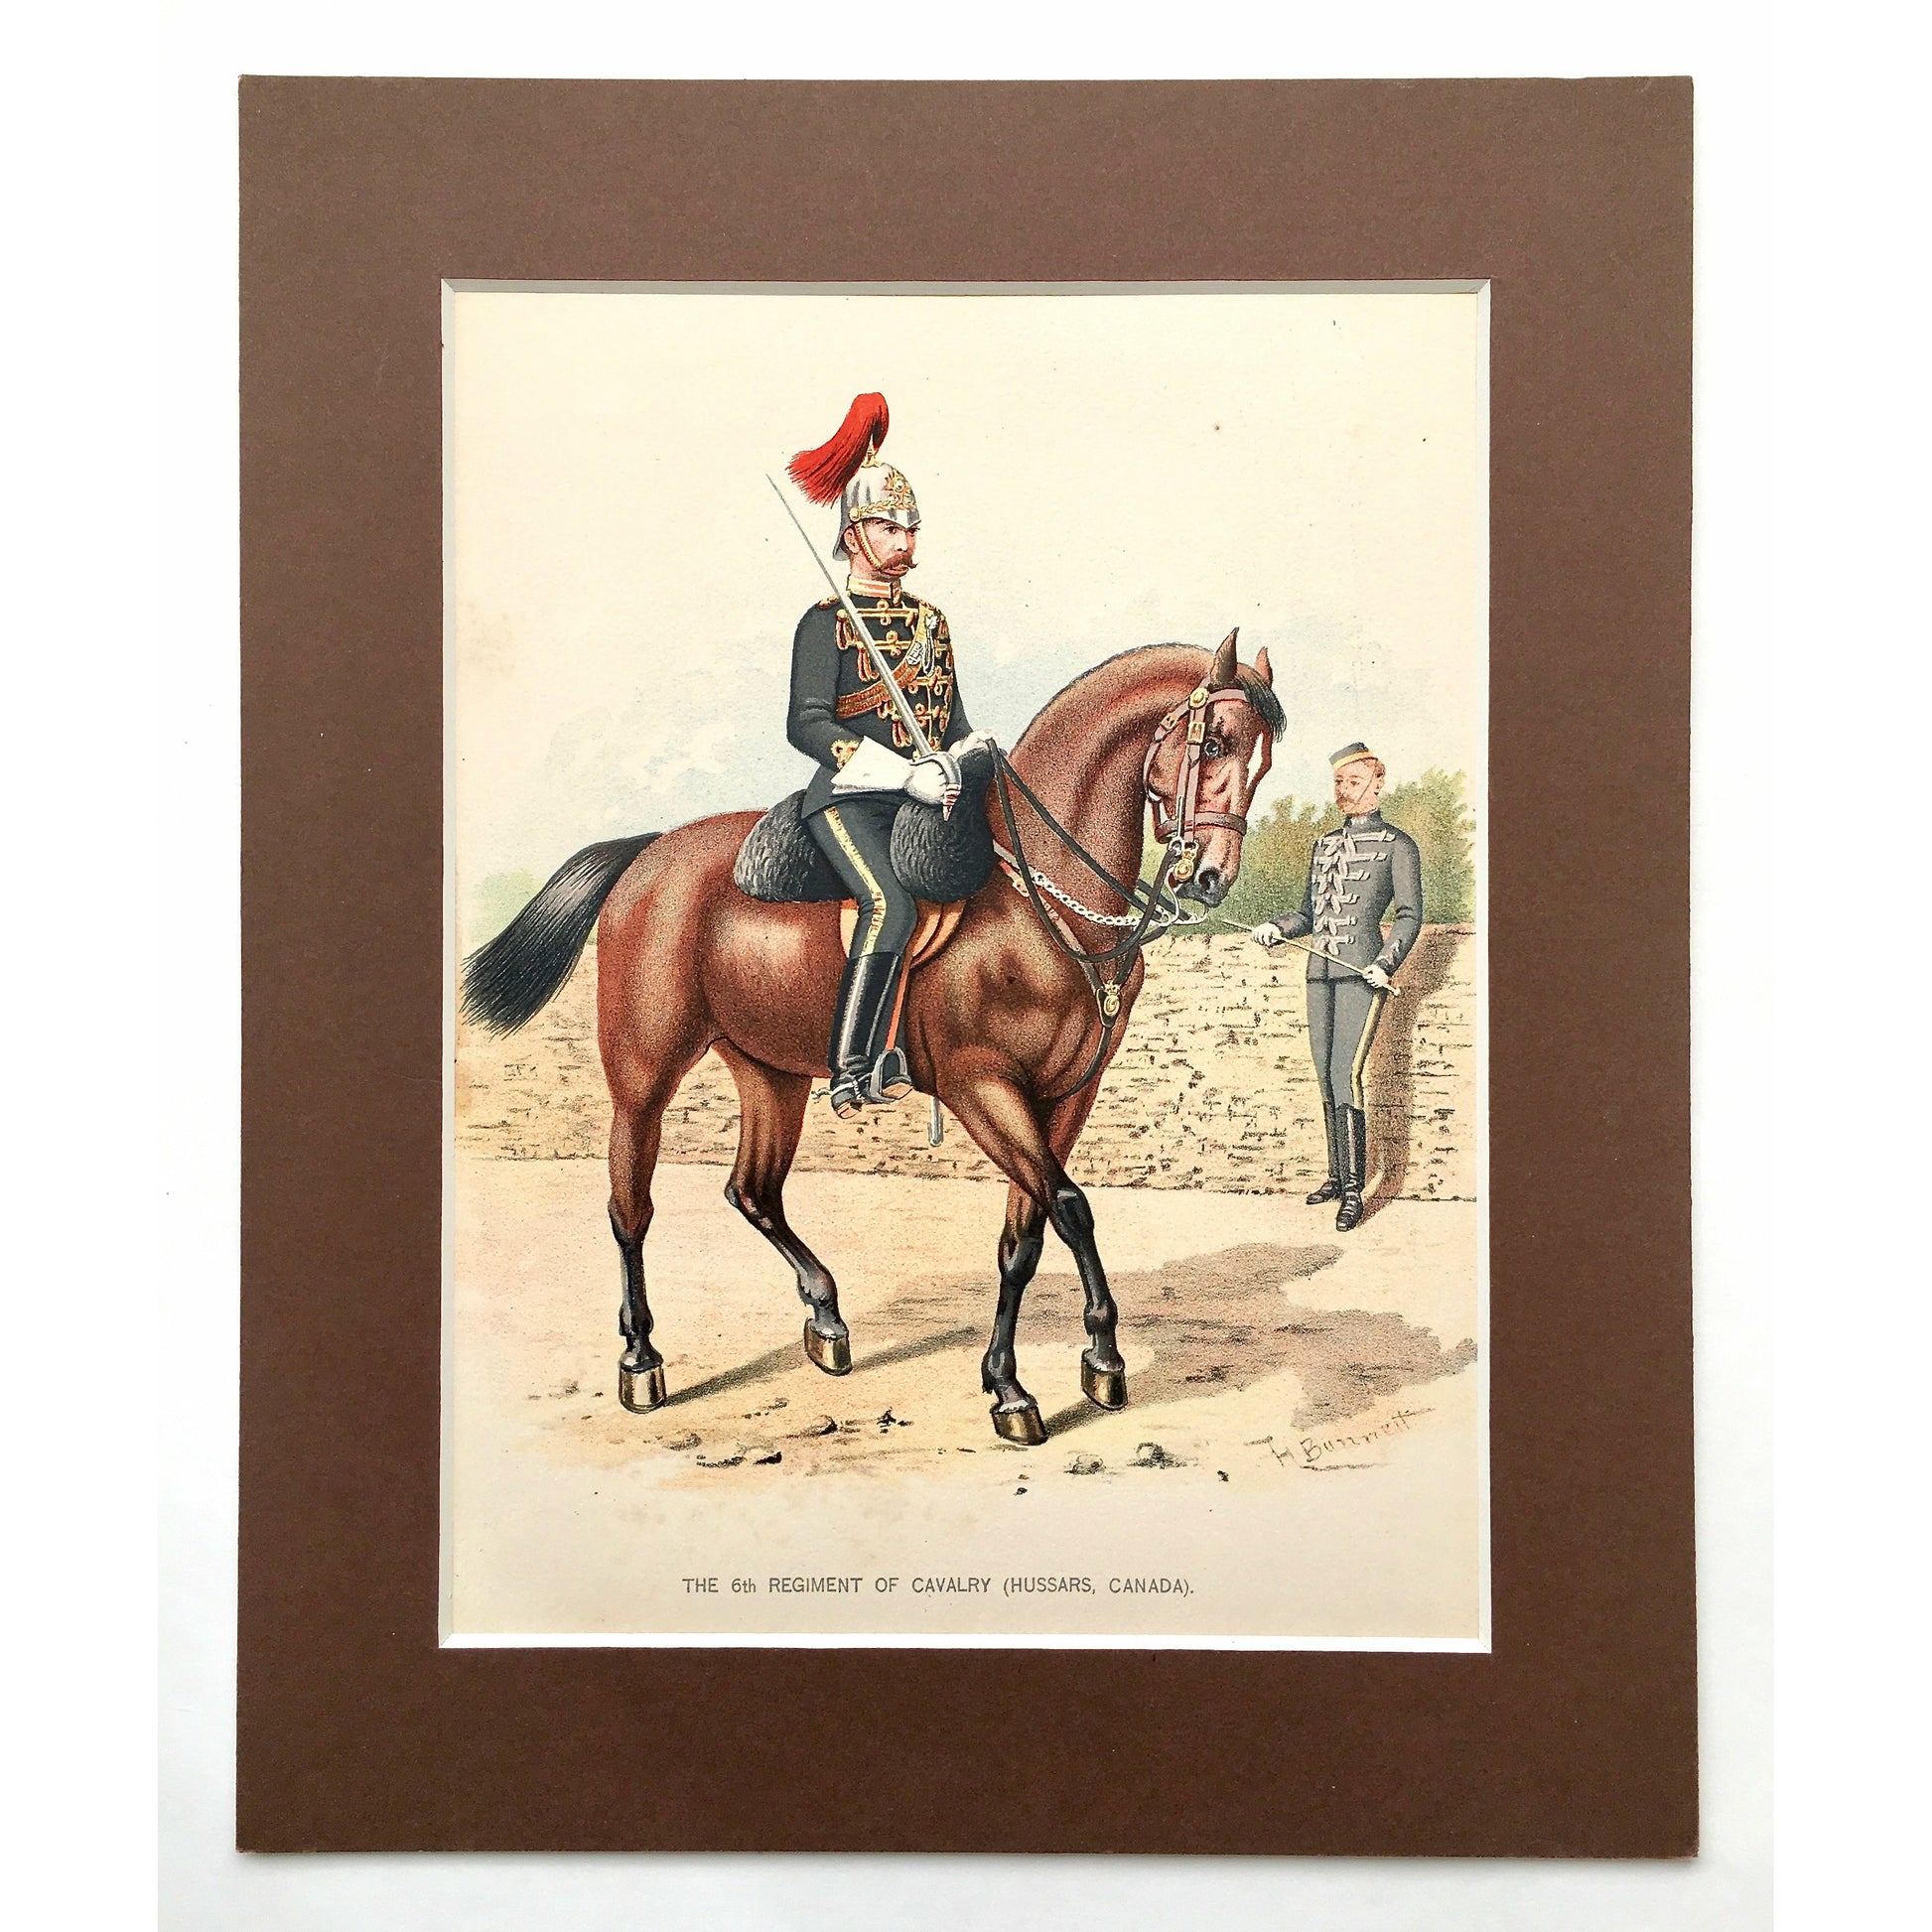 The 6th Regiment of Cavalry, Cavalry, 6th Regiment, Hussars, Canada, Artillery, Military, Military Costume, Horses, Riding, Costume, Uniform, Her Majesty's Army, Regiments, Queen's Forces, H. Bunnett, Bunnett, Sword, Army, London, 1890, Military Prints, Canadian, Canadian Military, Canadian Army, Armed Forces, Military Uniform, Chromolithograph, J. S. Virtue & Co., Antique Prints, Matted, Matted Prints, Brown Matting, Military History, Art History, Interior Decor, Home decor, Wall decor, Interior Design, 